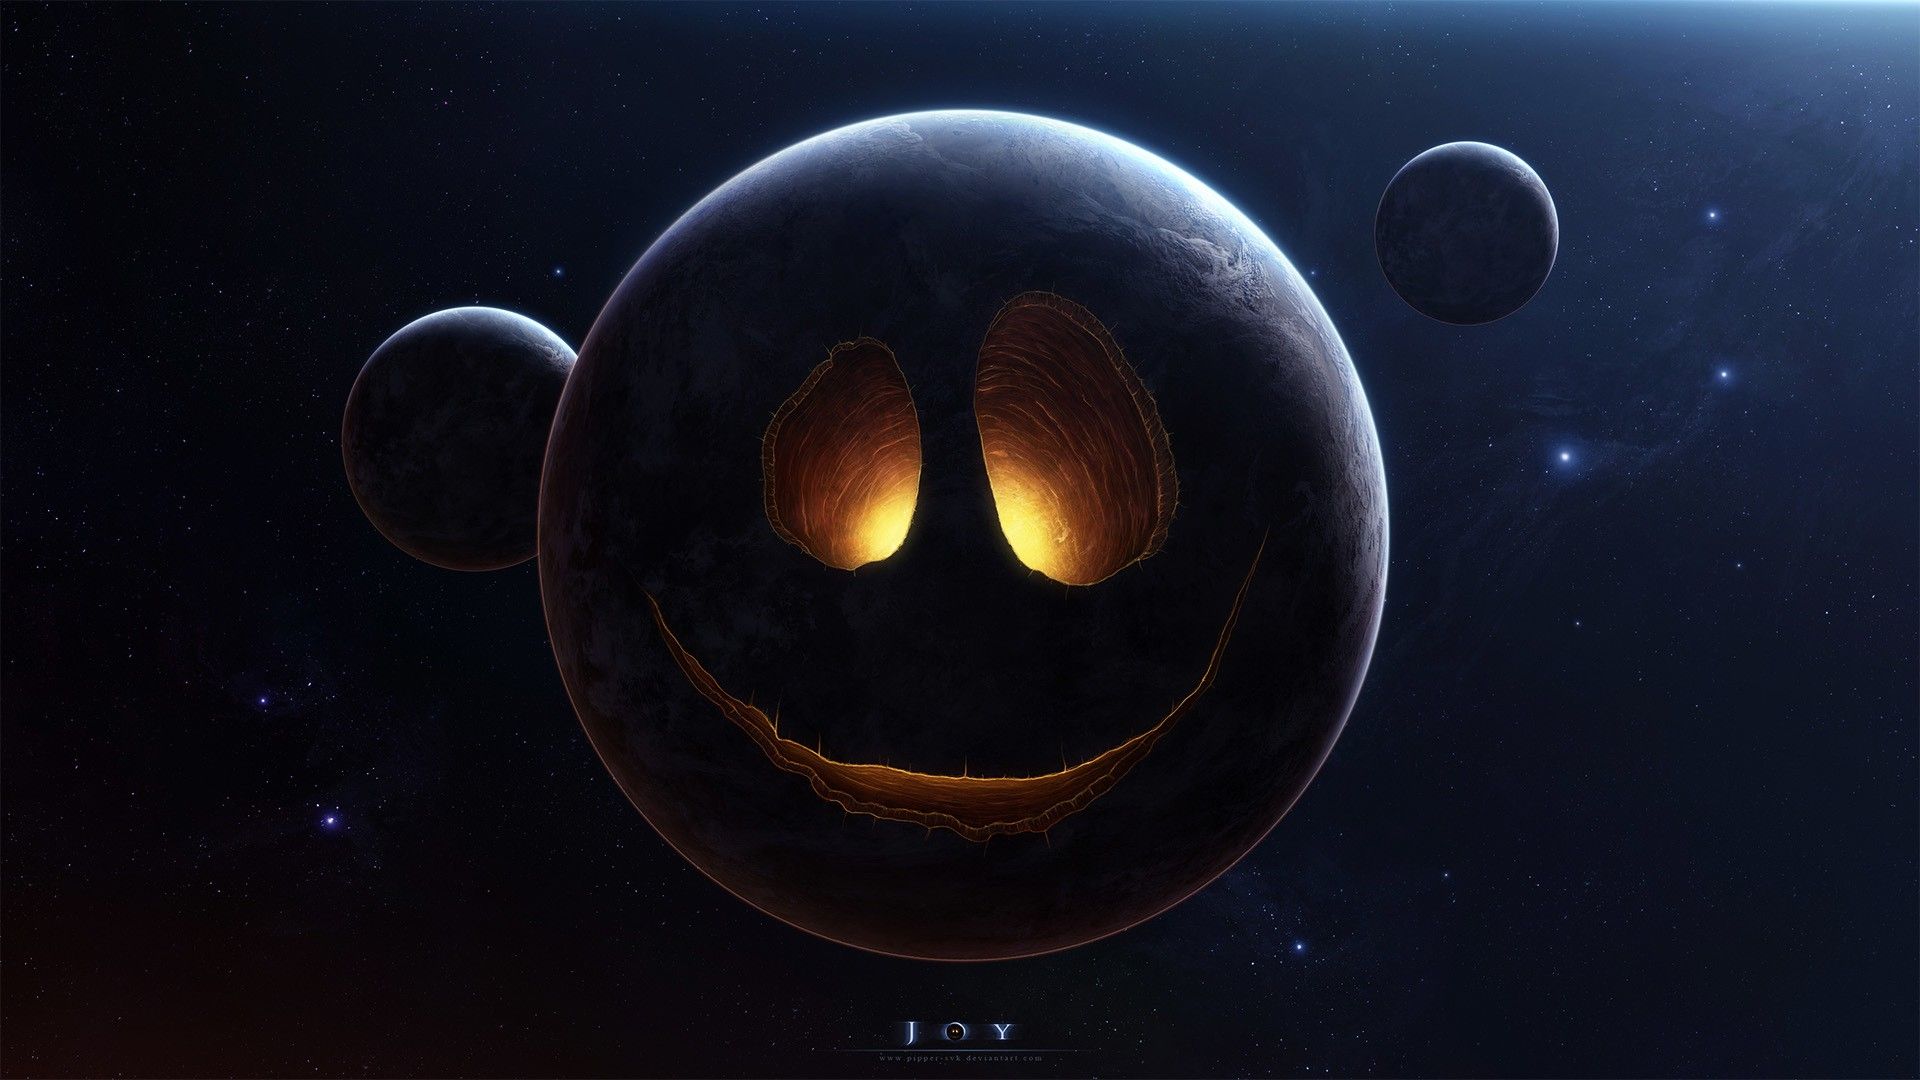 Planet Face Stars humor funny smiley space halloween wallpaperx1080